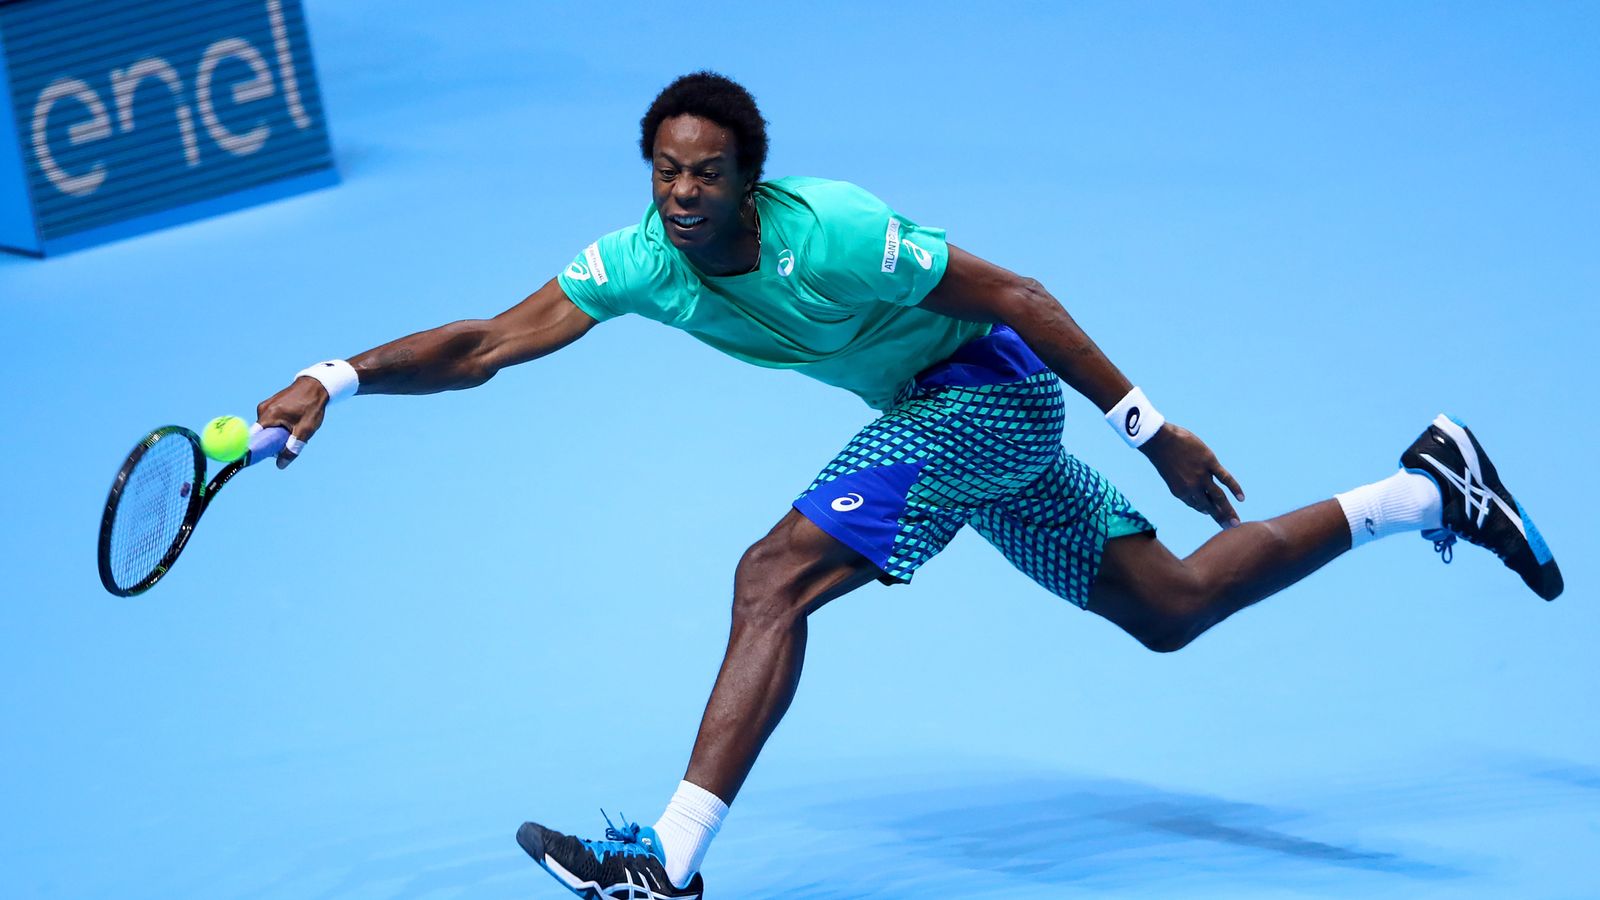 Gael Monfils takes on Dominic Thiem at the ATP World Tour Finals ...